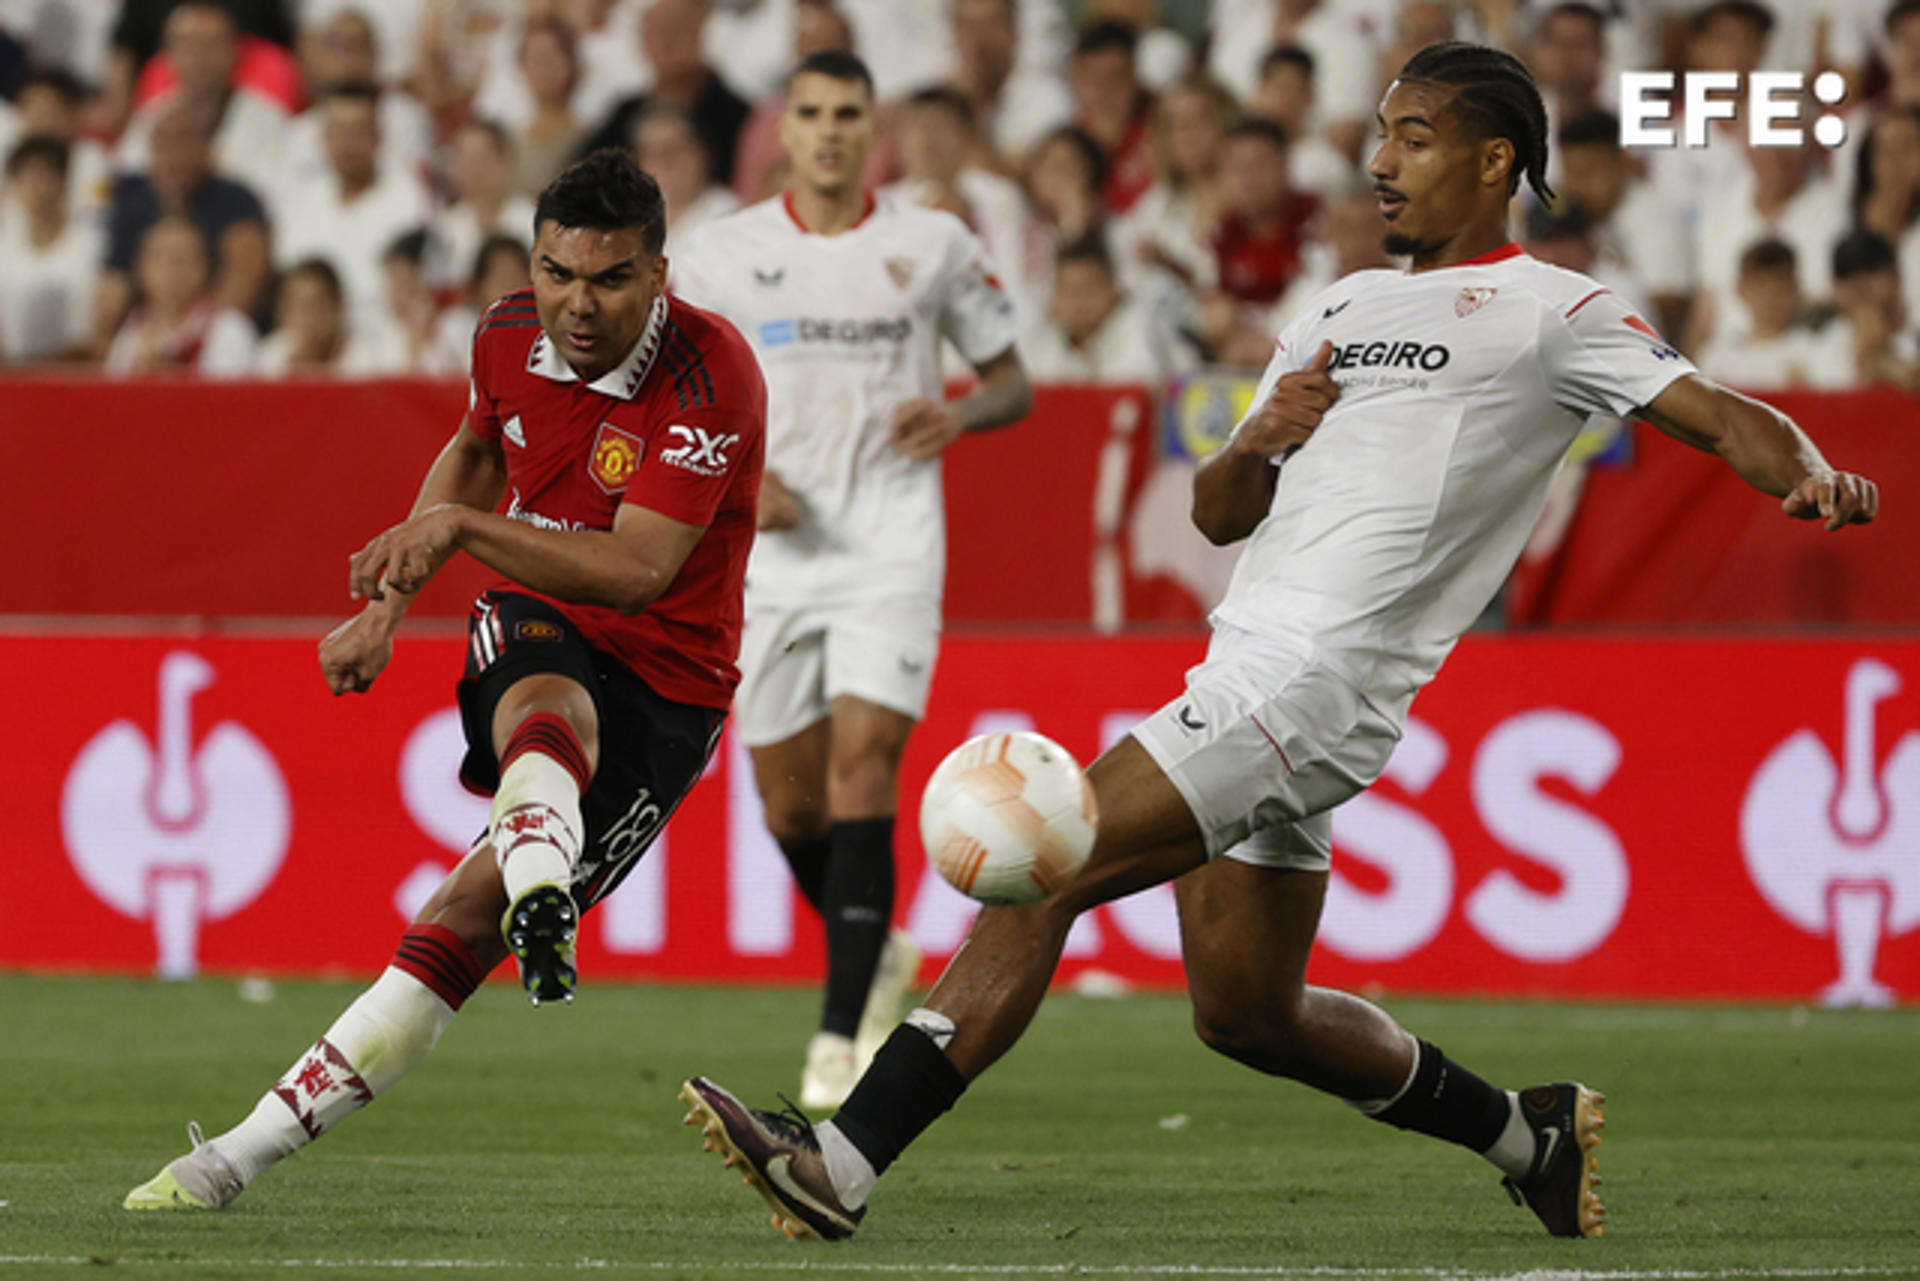 Sevilla FC's Loic Bade (R) in action against Manchester United's Casemiro during the UEFA Europe League quarterfinal second leg in Seville, Spain, on 20 April 2023. EFE/Julio Muñoz
